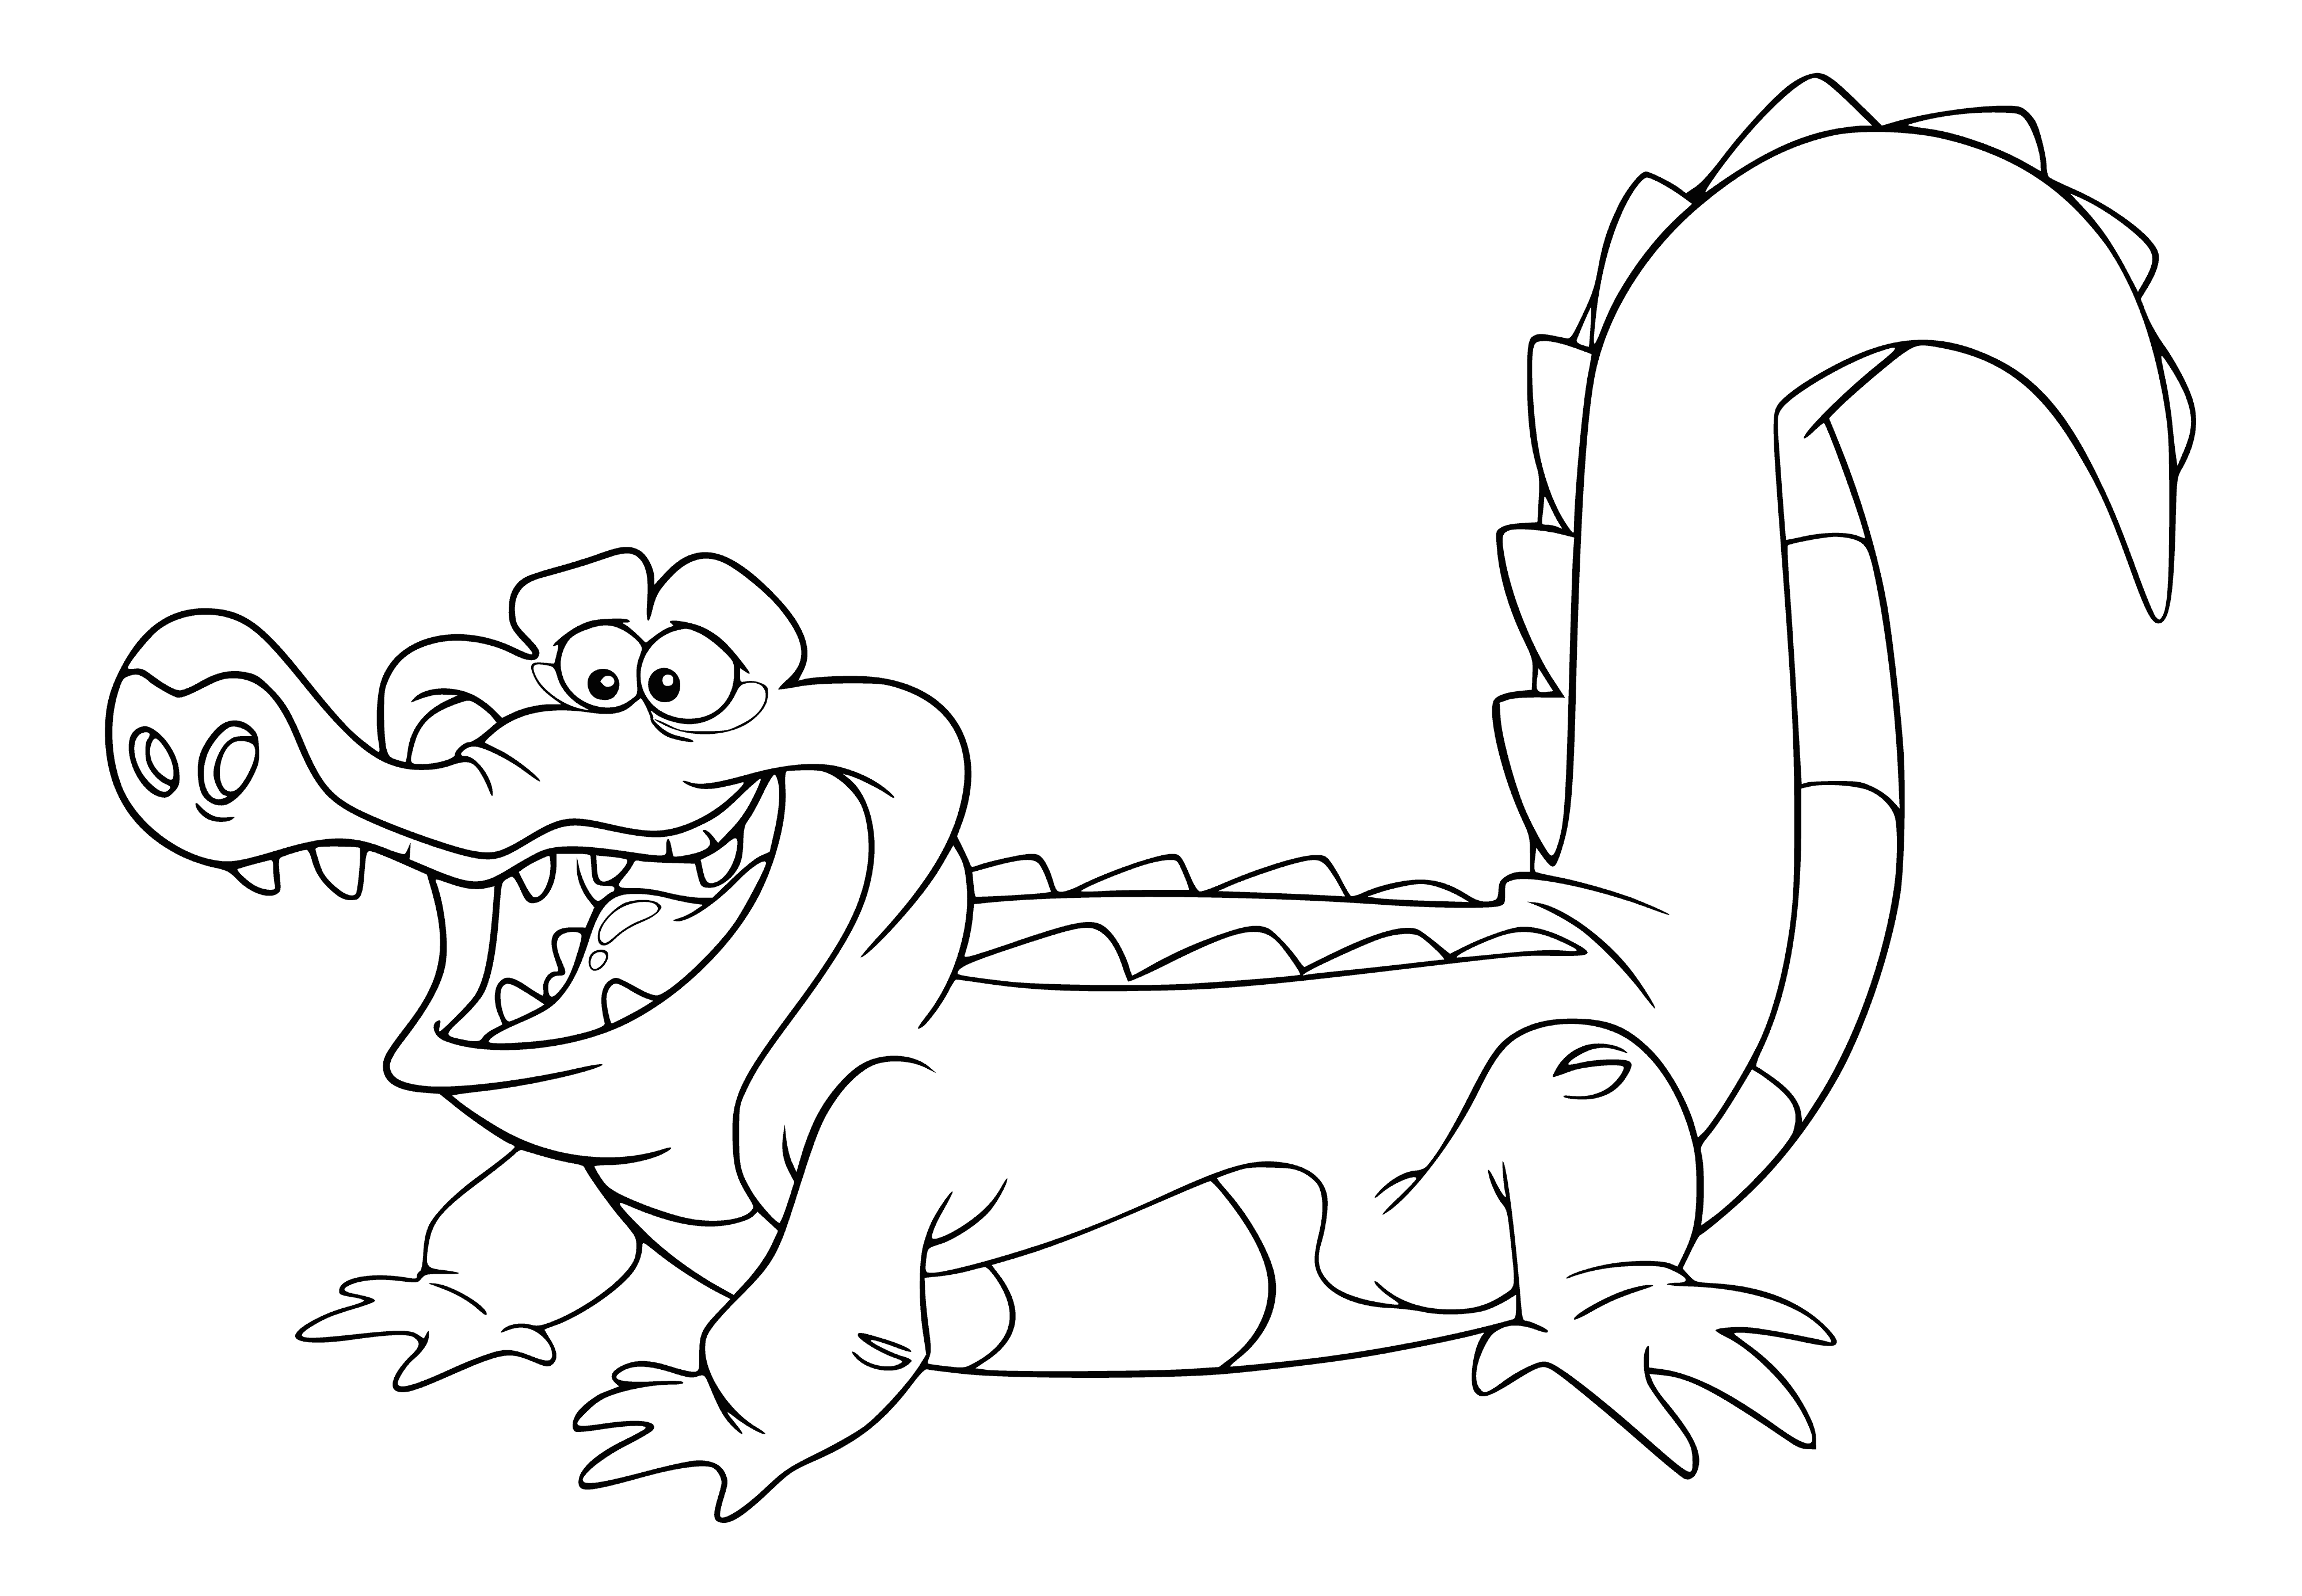 coloring page: Crocodile Tick-Tock chases Jake & the Never Land Pirates, wearing a pirate hat & a clock on his belly. He has big, sharp teeth! #coloring